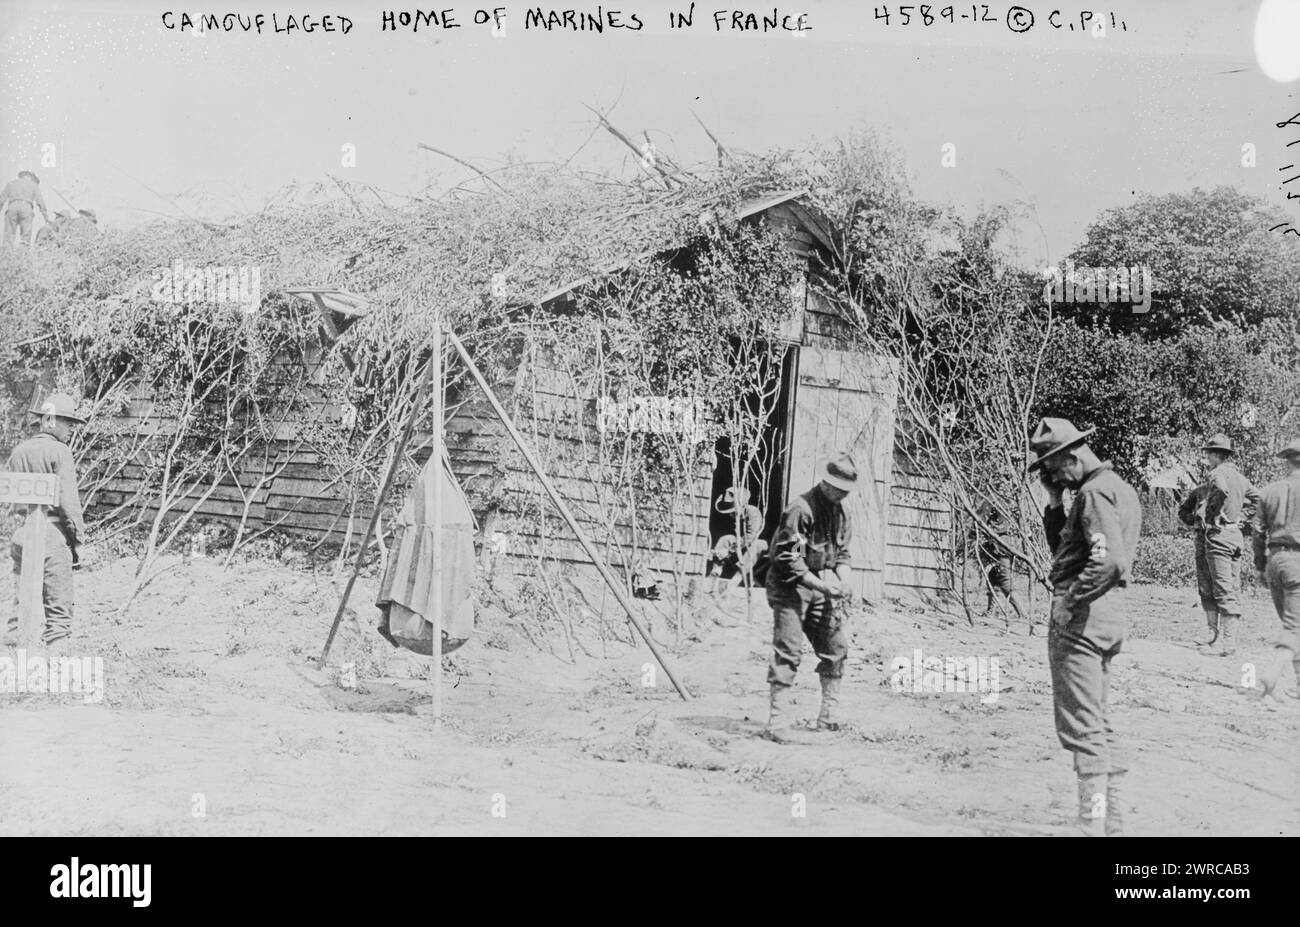 Camouflaged home of marines in France, Photograph shows American soldiers from the Fifth Marines in front of a wooden hut covered with sticks and leaves in Menancourt, France during World War I., 1918 May 21, World War, 1914-1918, Glass negatives, 1 negative: glass Stock Photo